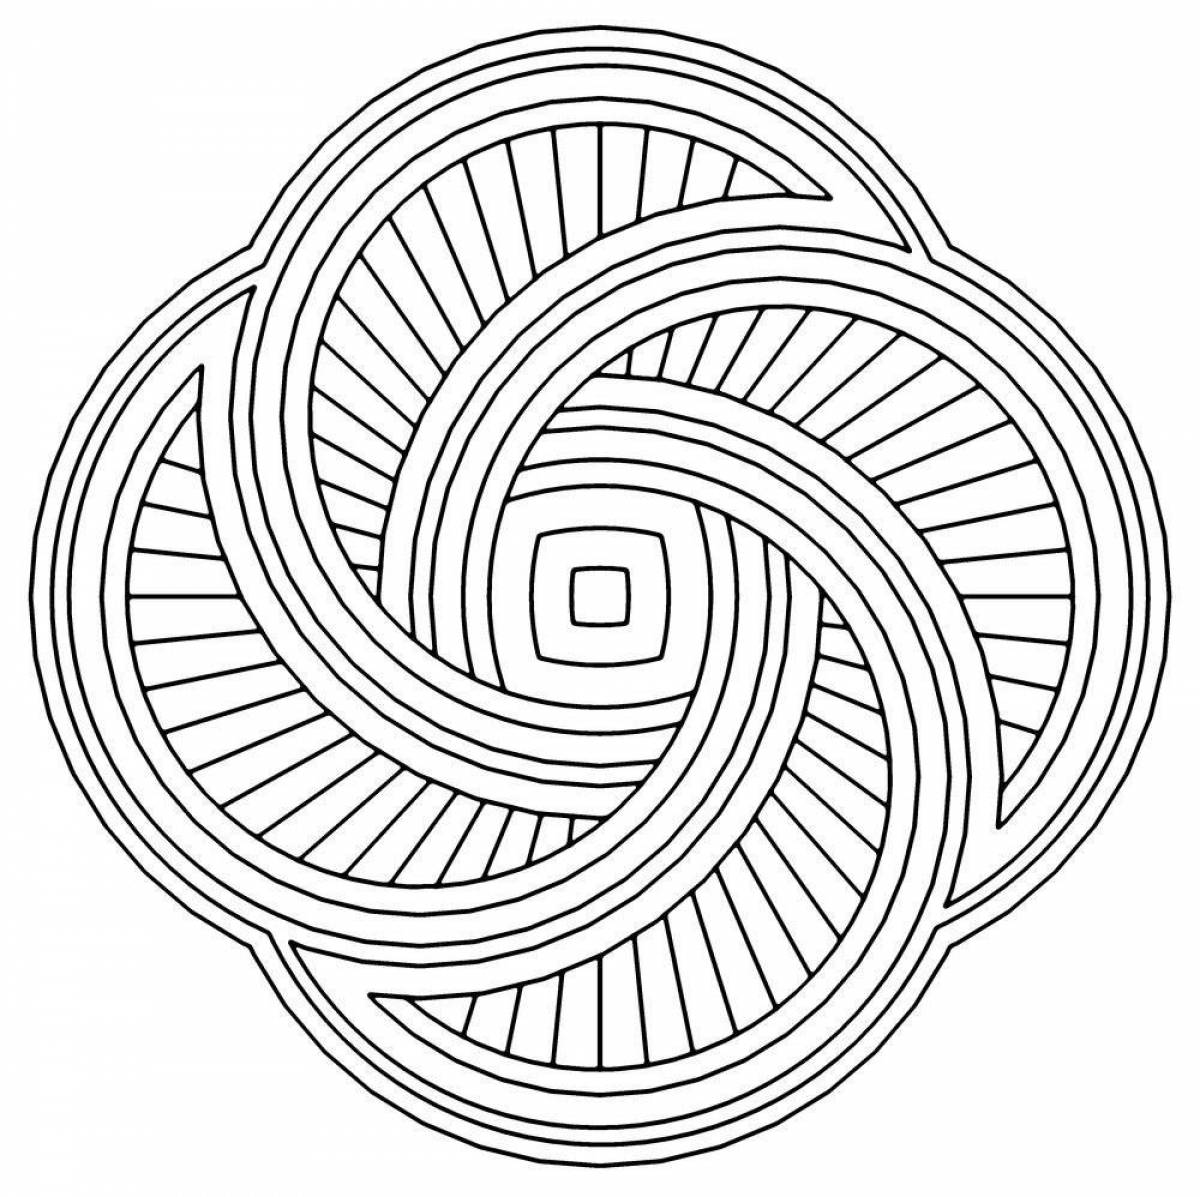 Coloring page with an attractive spiral pattern